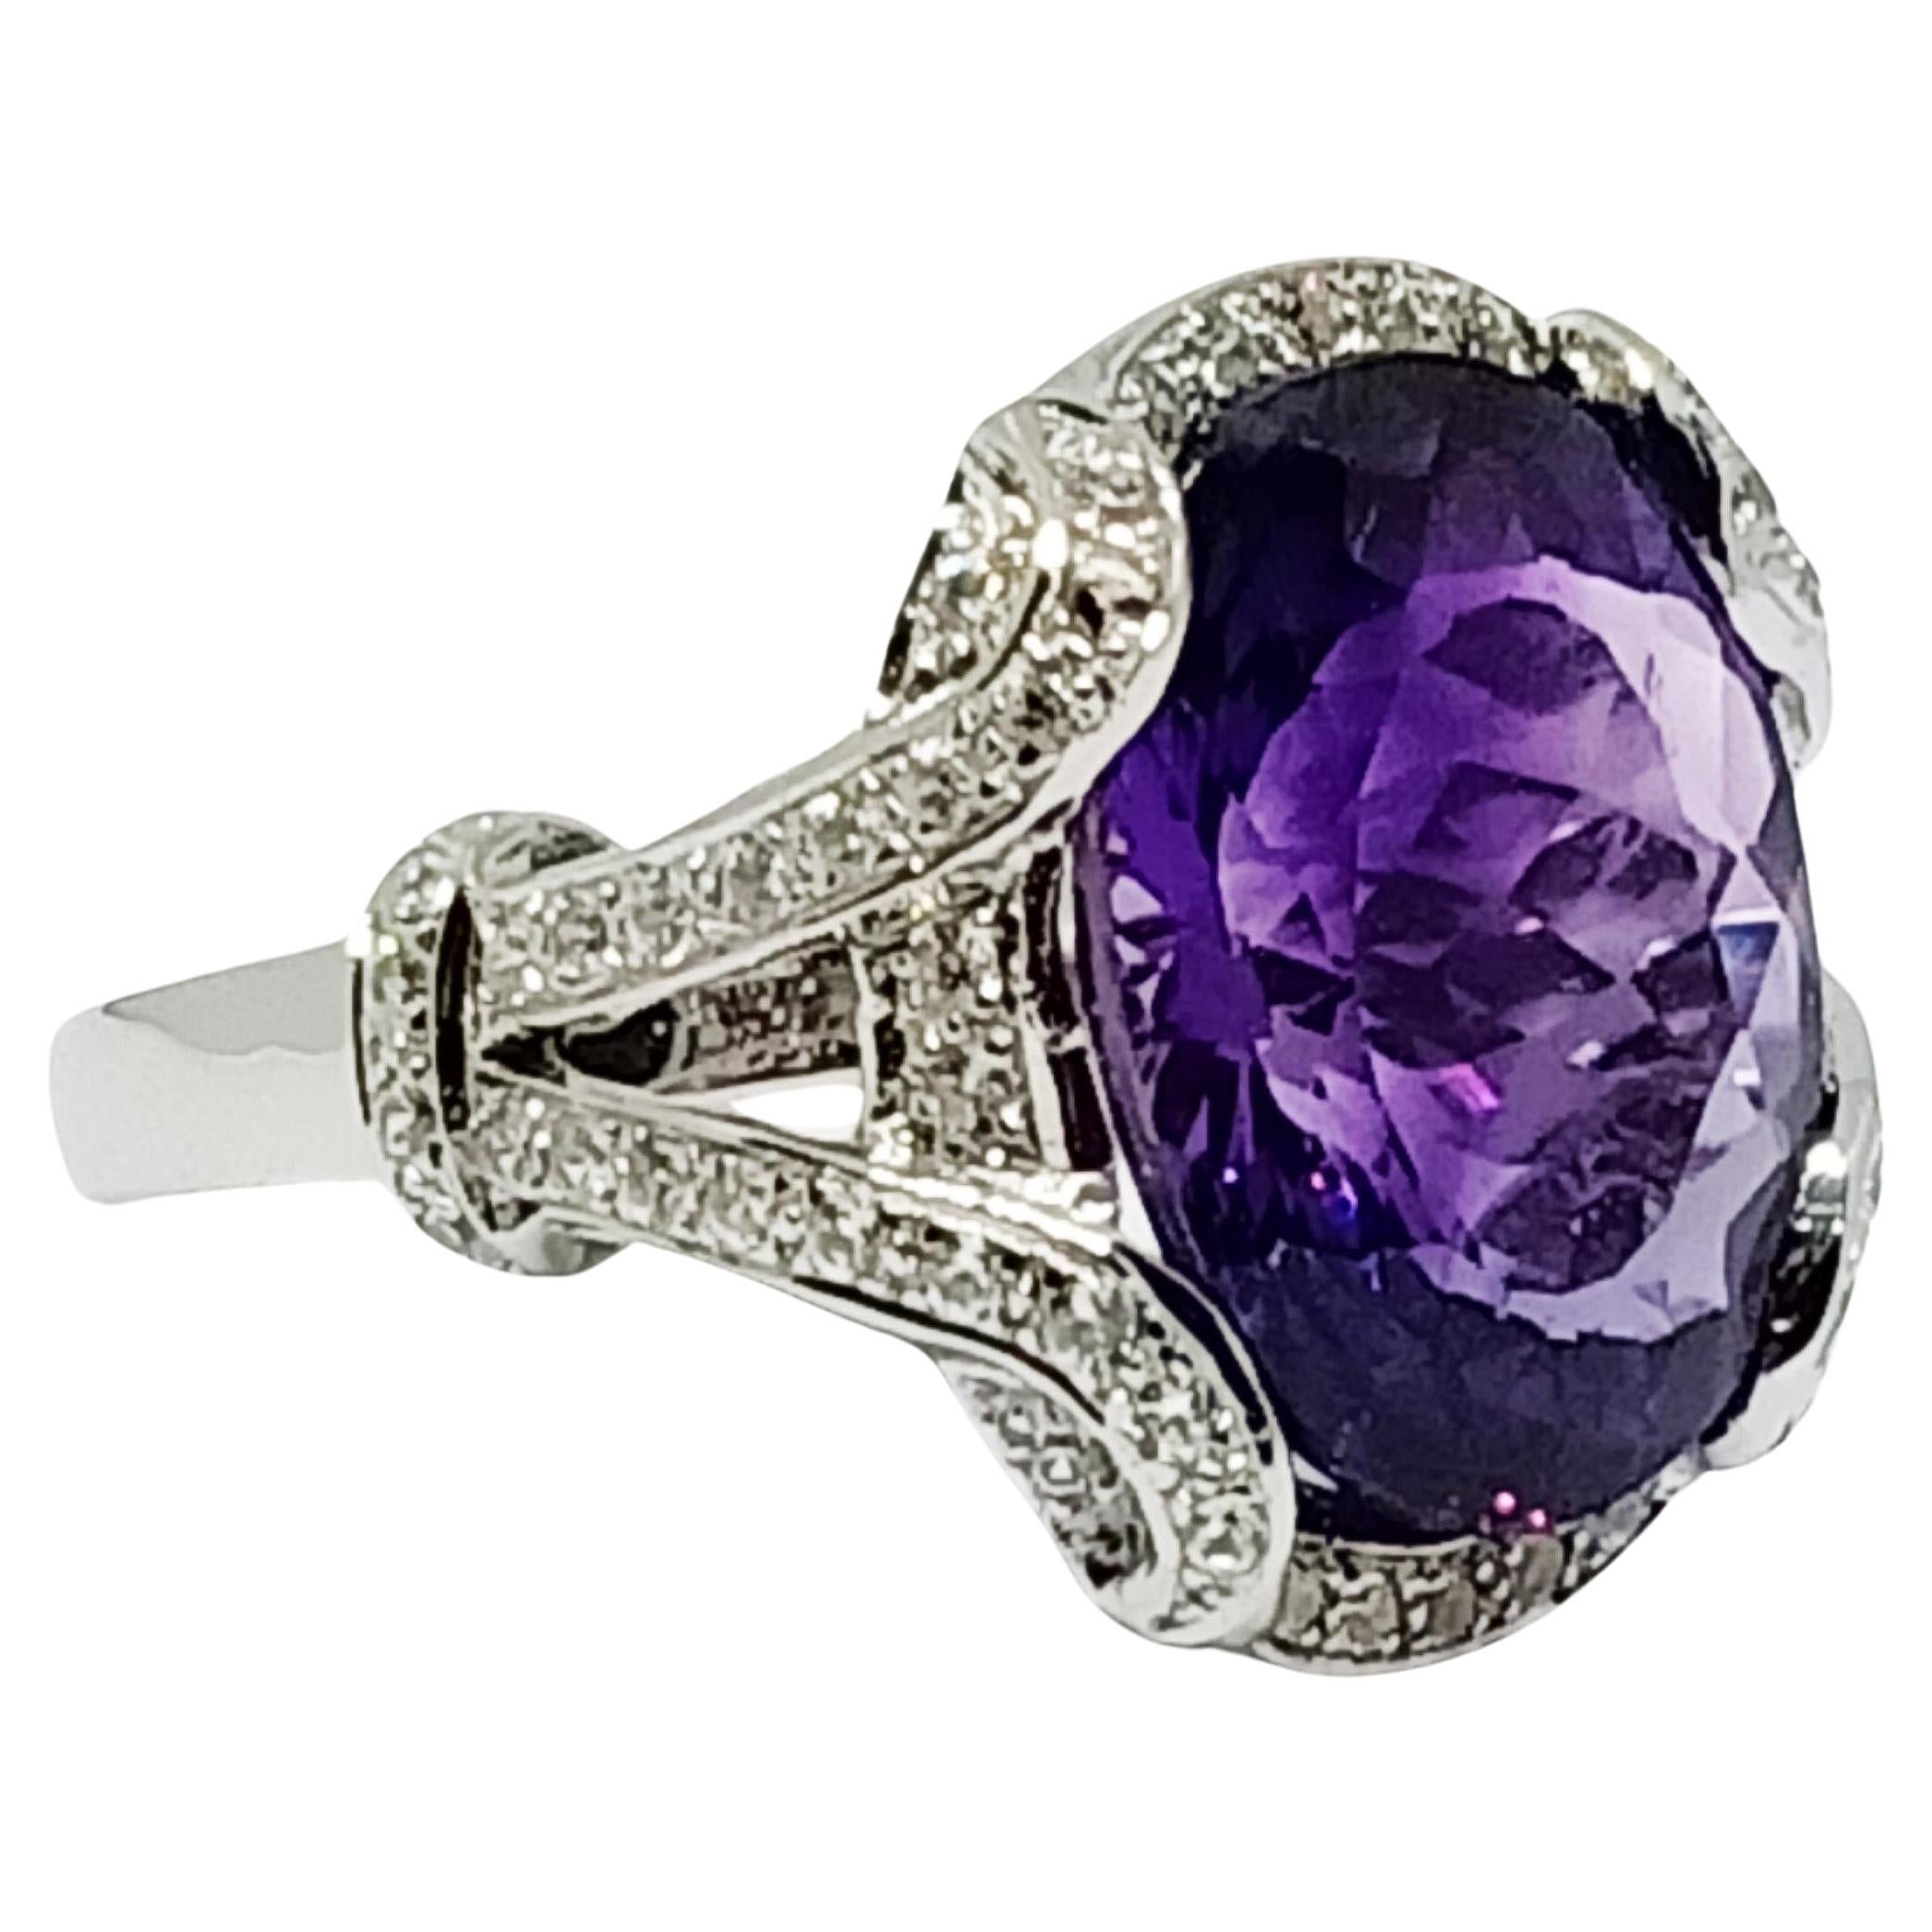 African Amethyst Oval 16.7x12.5 mm. (8.56 cts)  1 pc.
White zircon 1.25mm 66 pcs.
Over sterling silver in 18K white gold plated.
Size 7.25 US.

Search ( storefront , seller ) Ornamento jewellery
